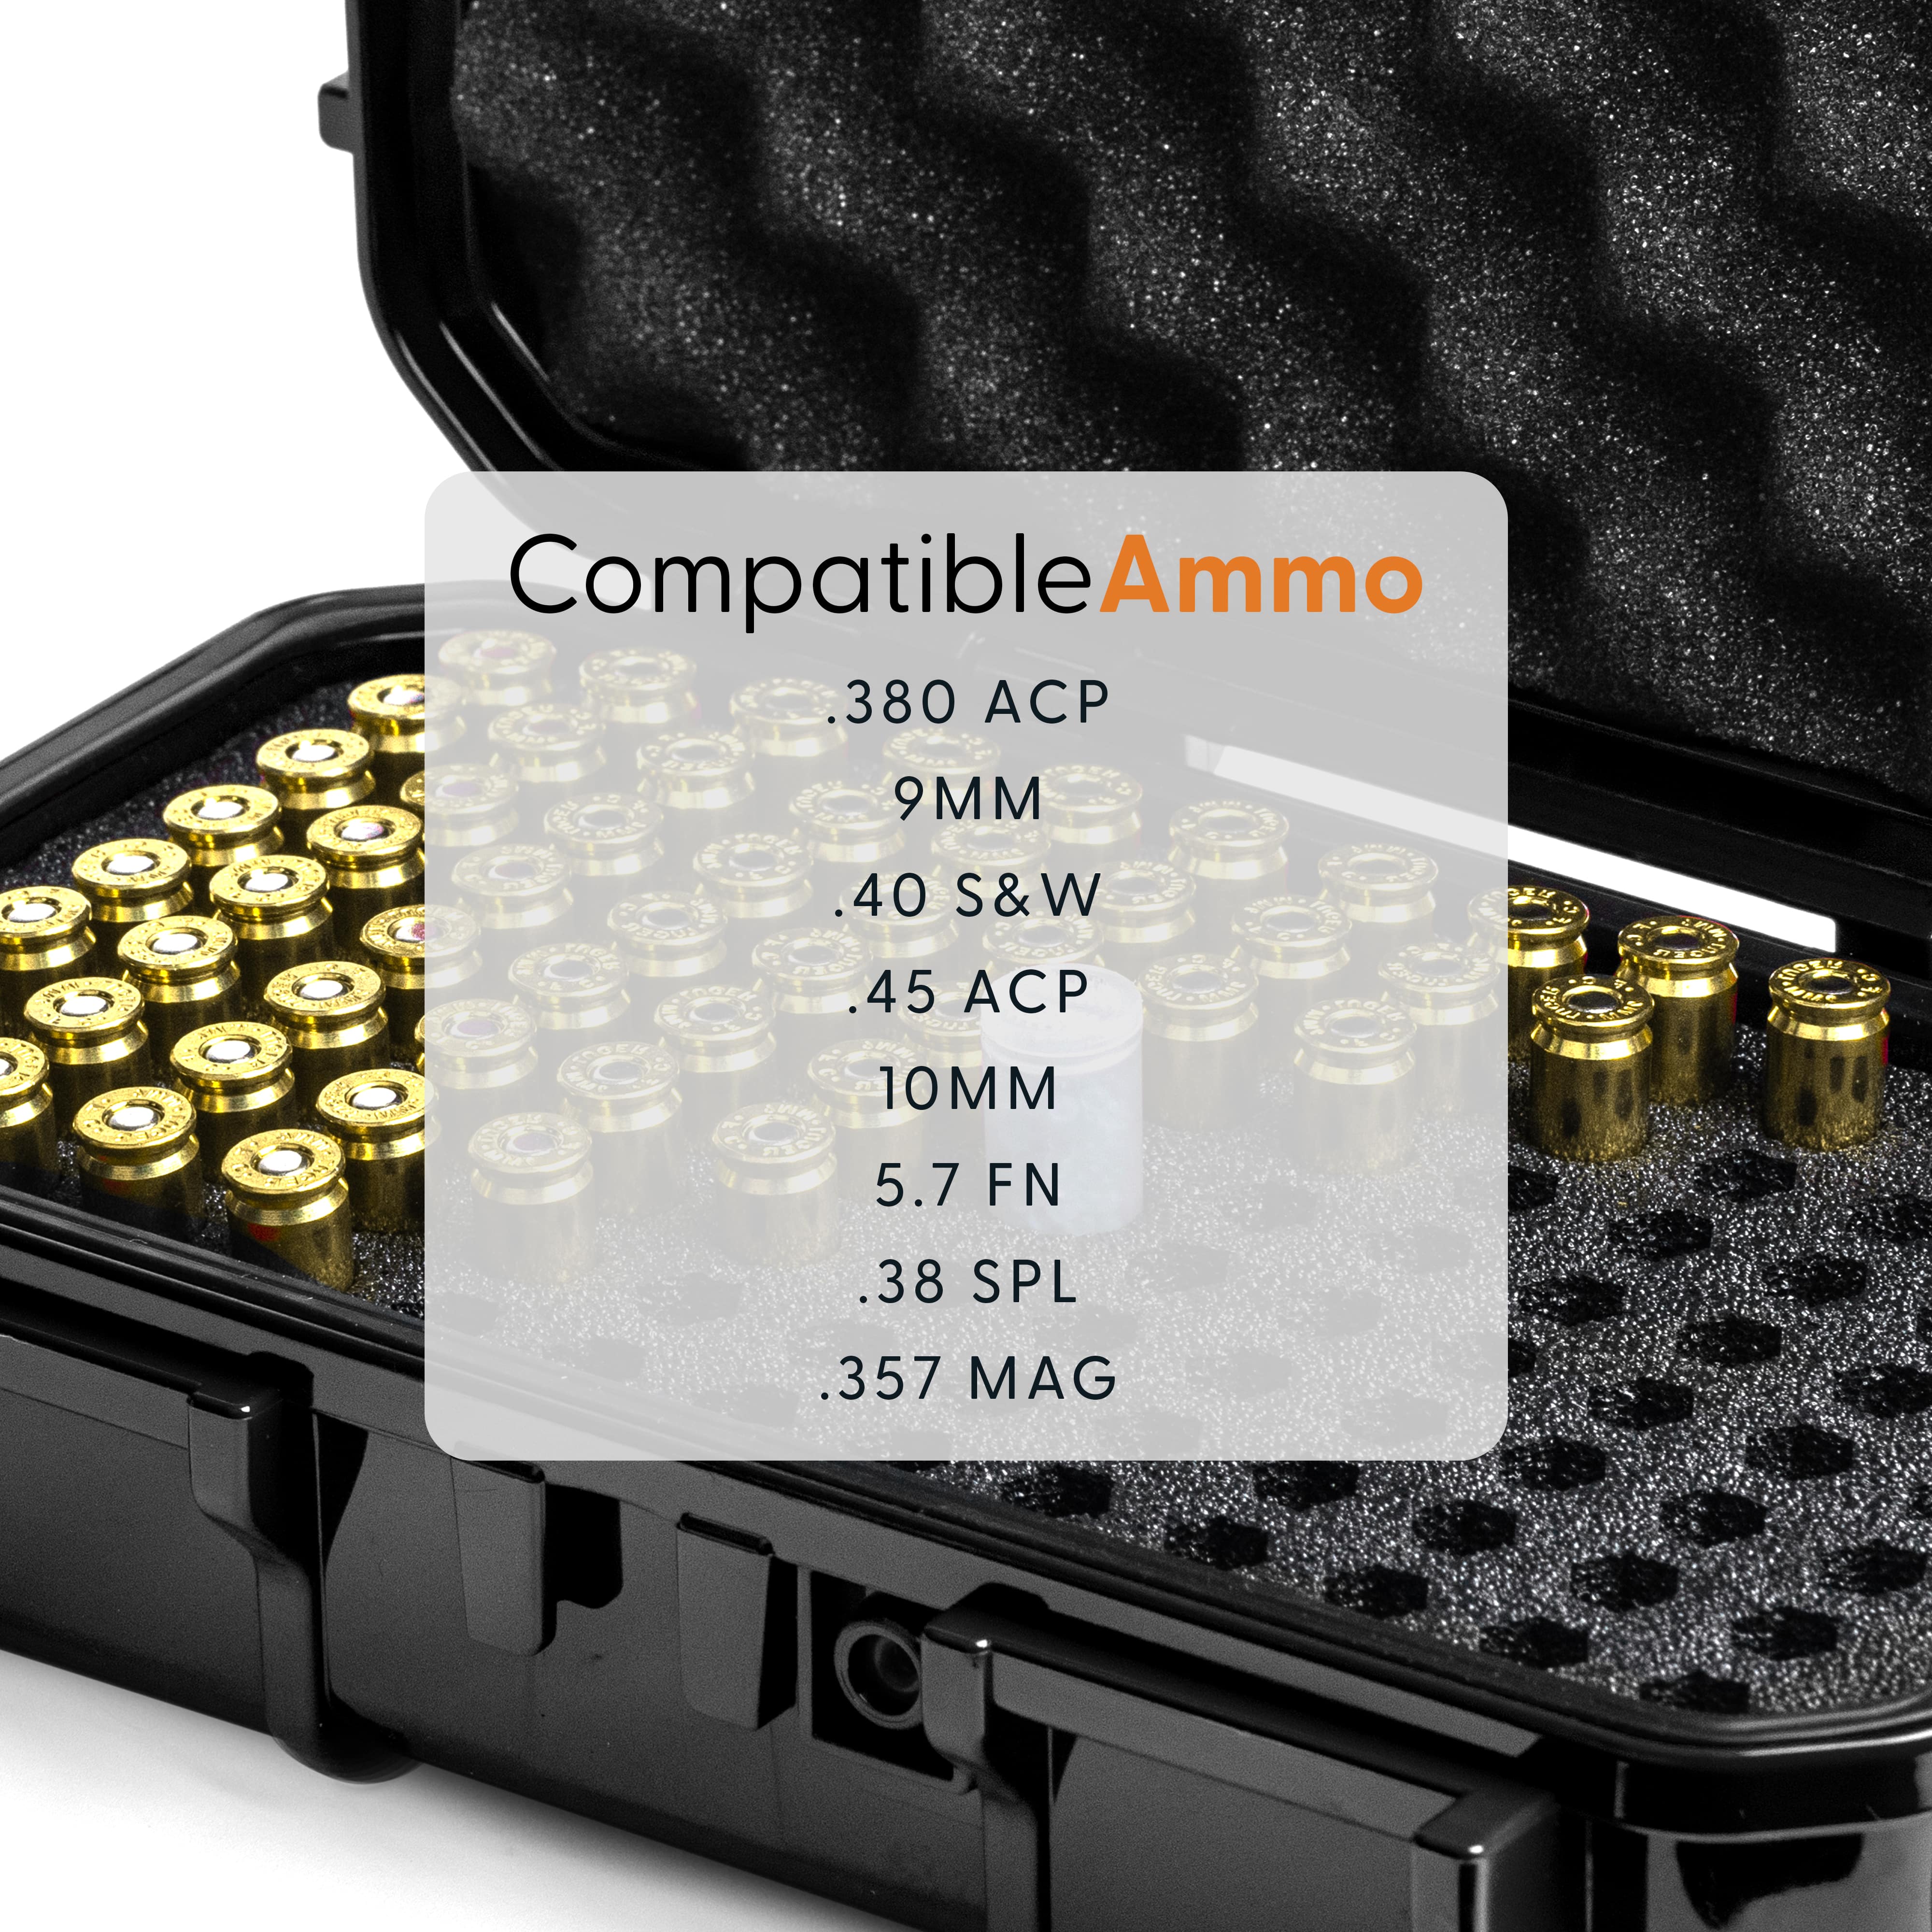  Evergreen Micro Pistol Ammo Case for Storing .22-9mm Ammo  Bullets - Travel Safe/Mil Spec/Waterproof/USA Made (52 Black, Pistol Ammo)  : Sports & Outdoors